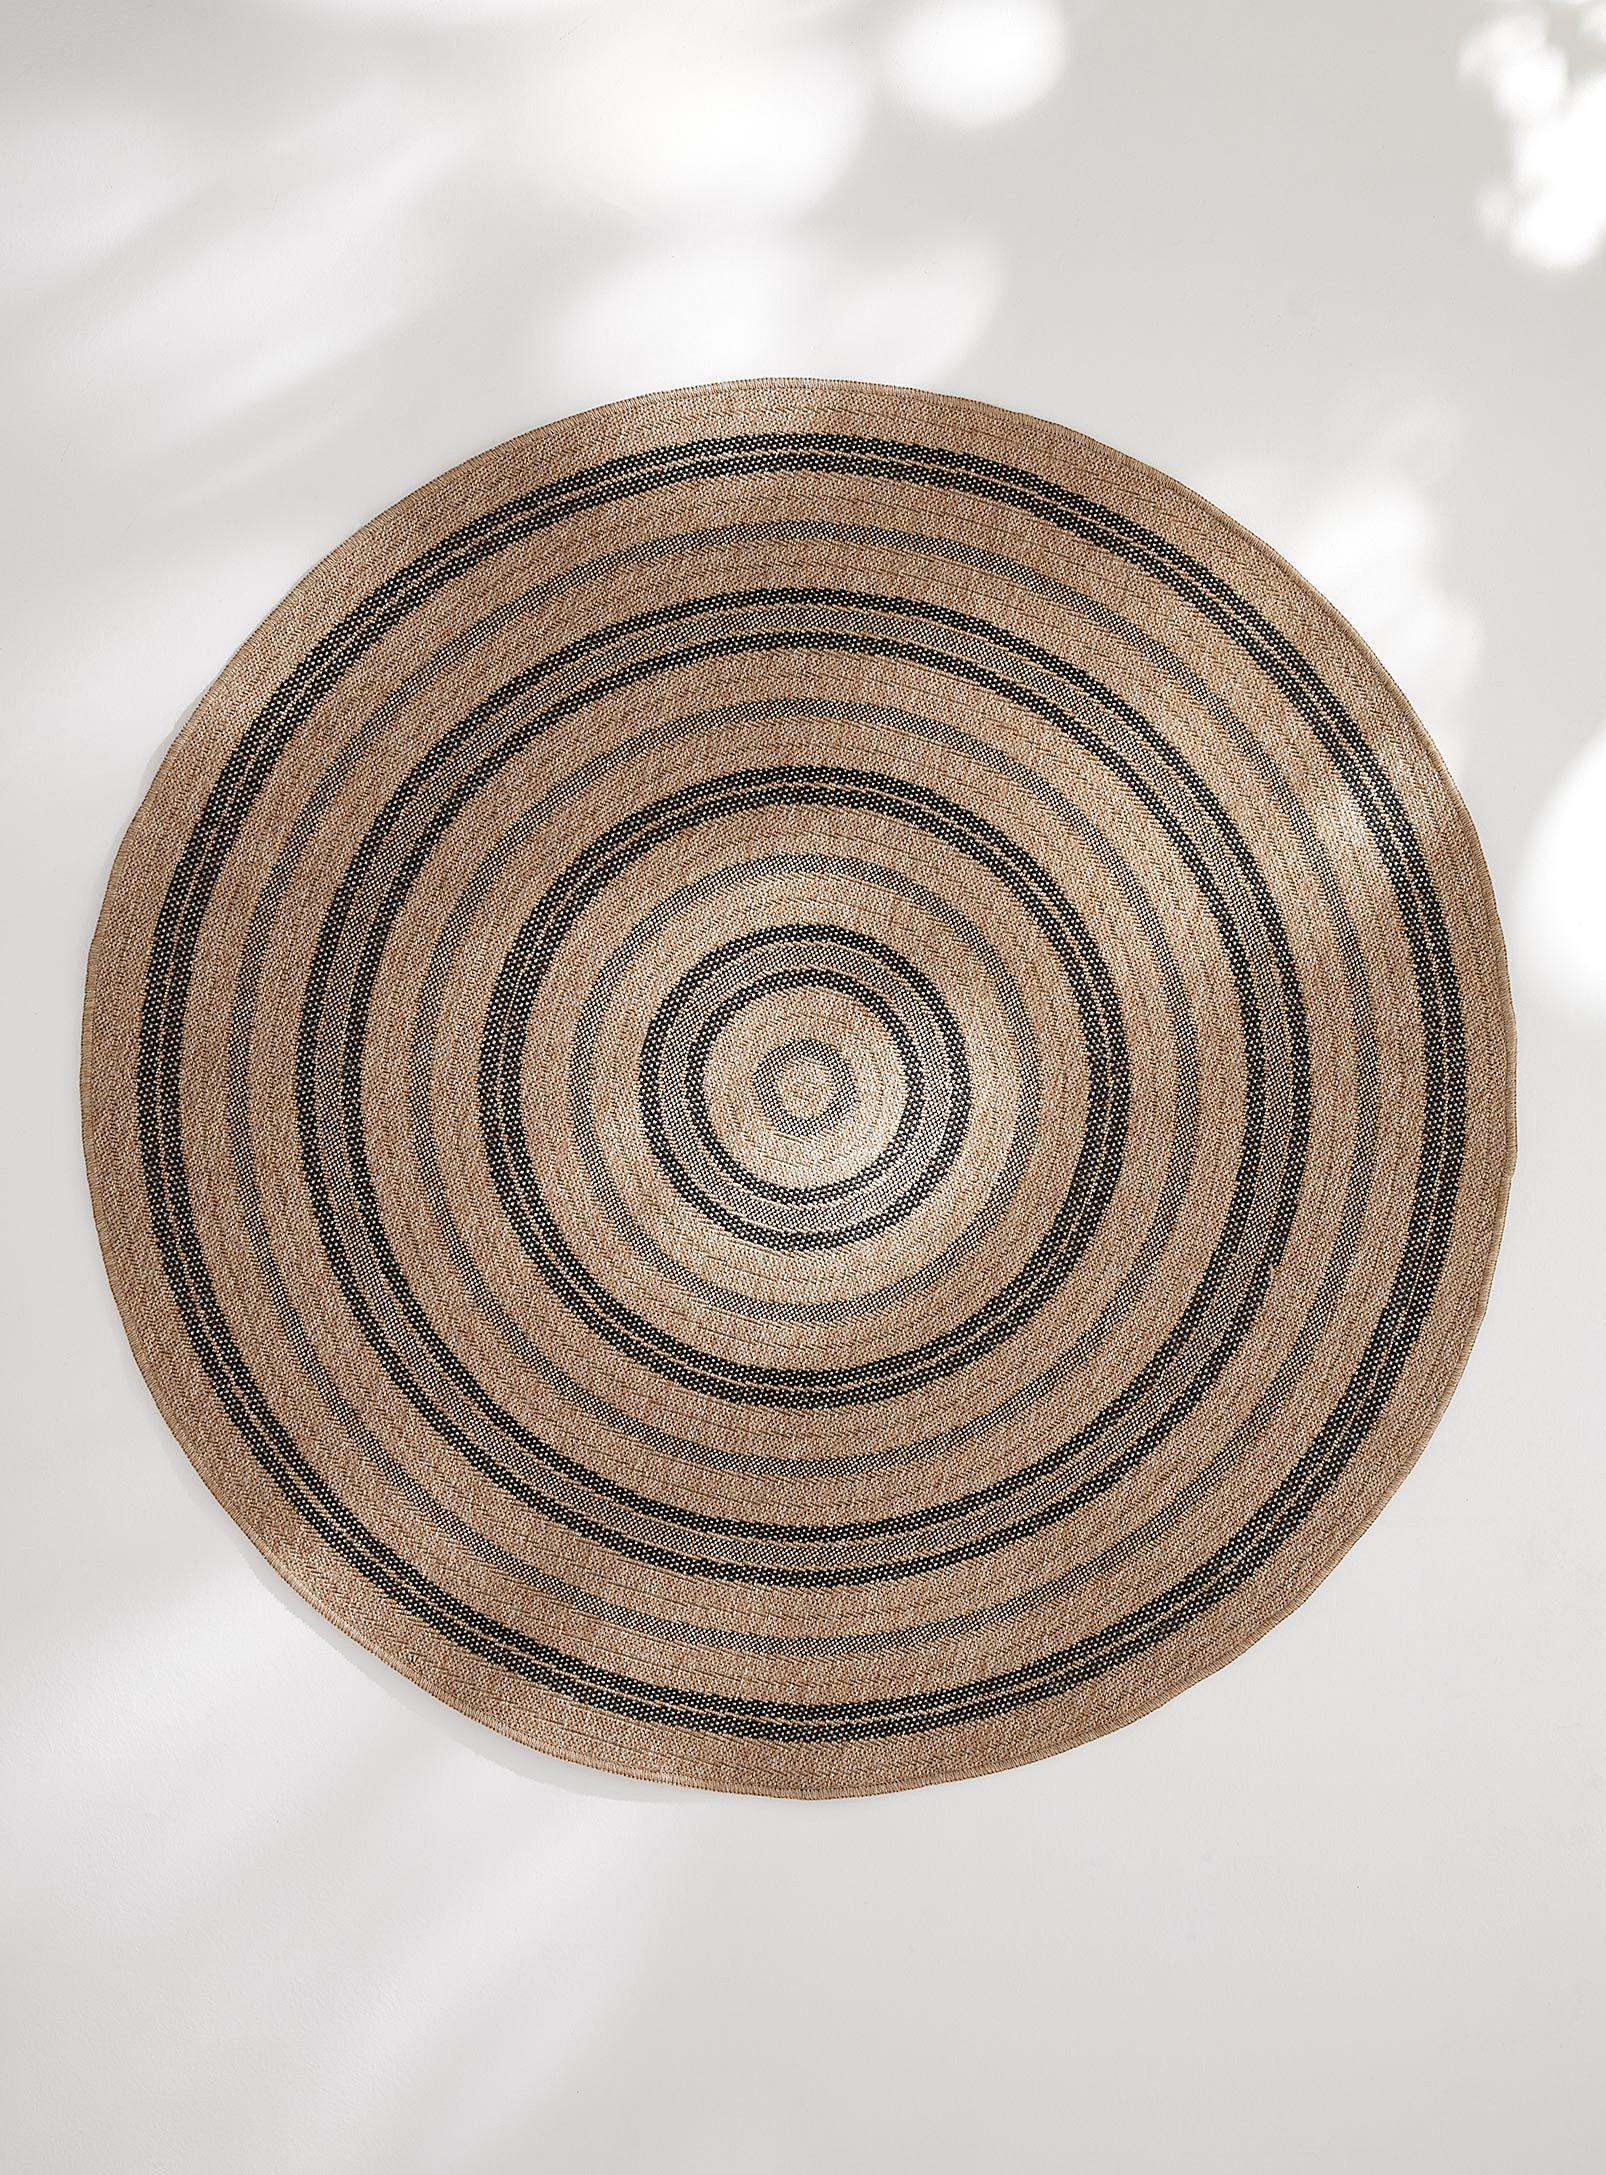 Simons Maison - Rustic rings indoor-outdoor rug